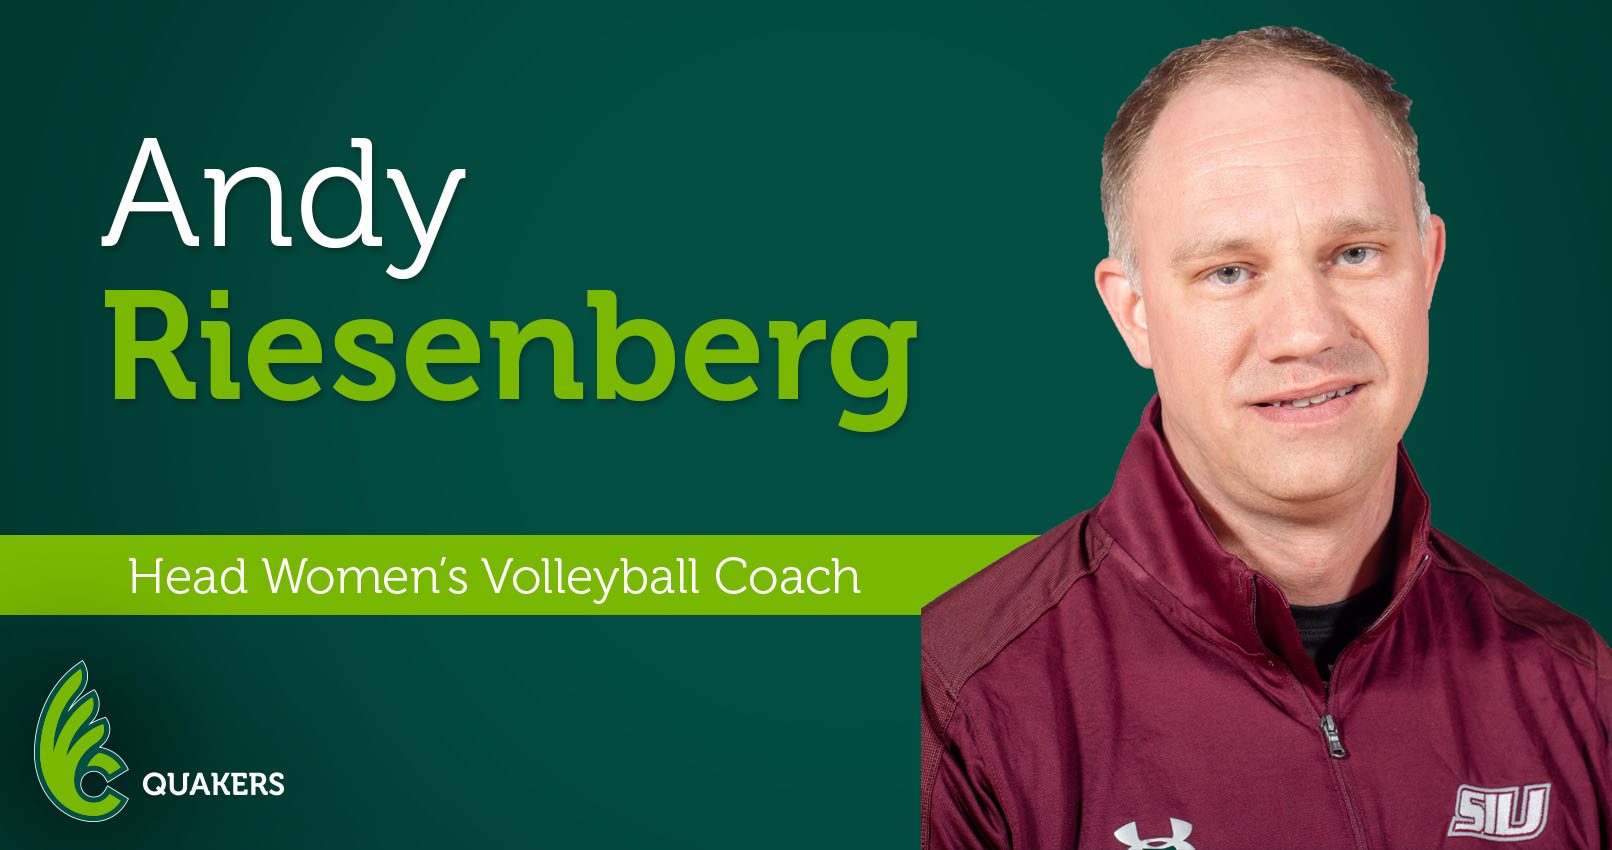 Andy Riesenberg Named Head Volleyball Coach